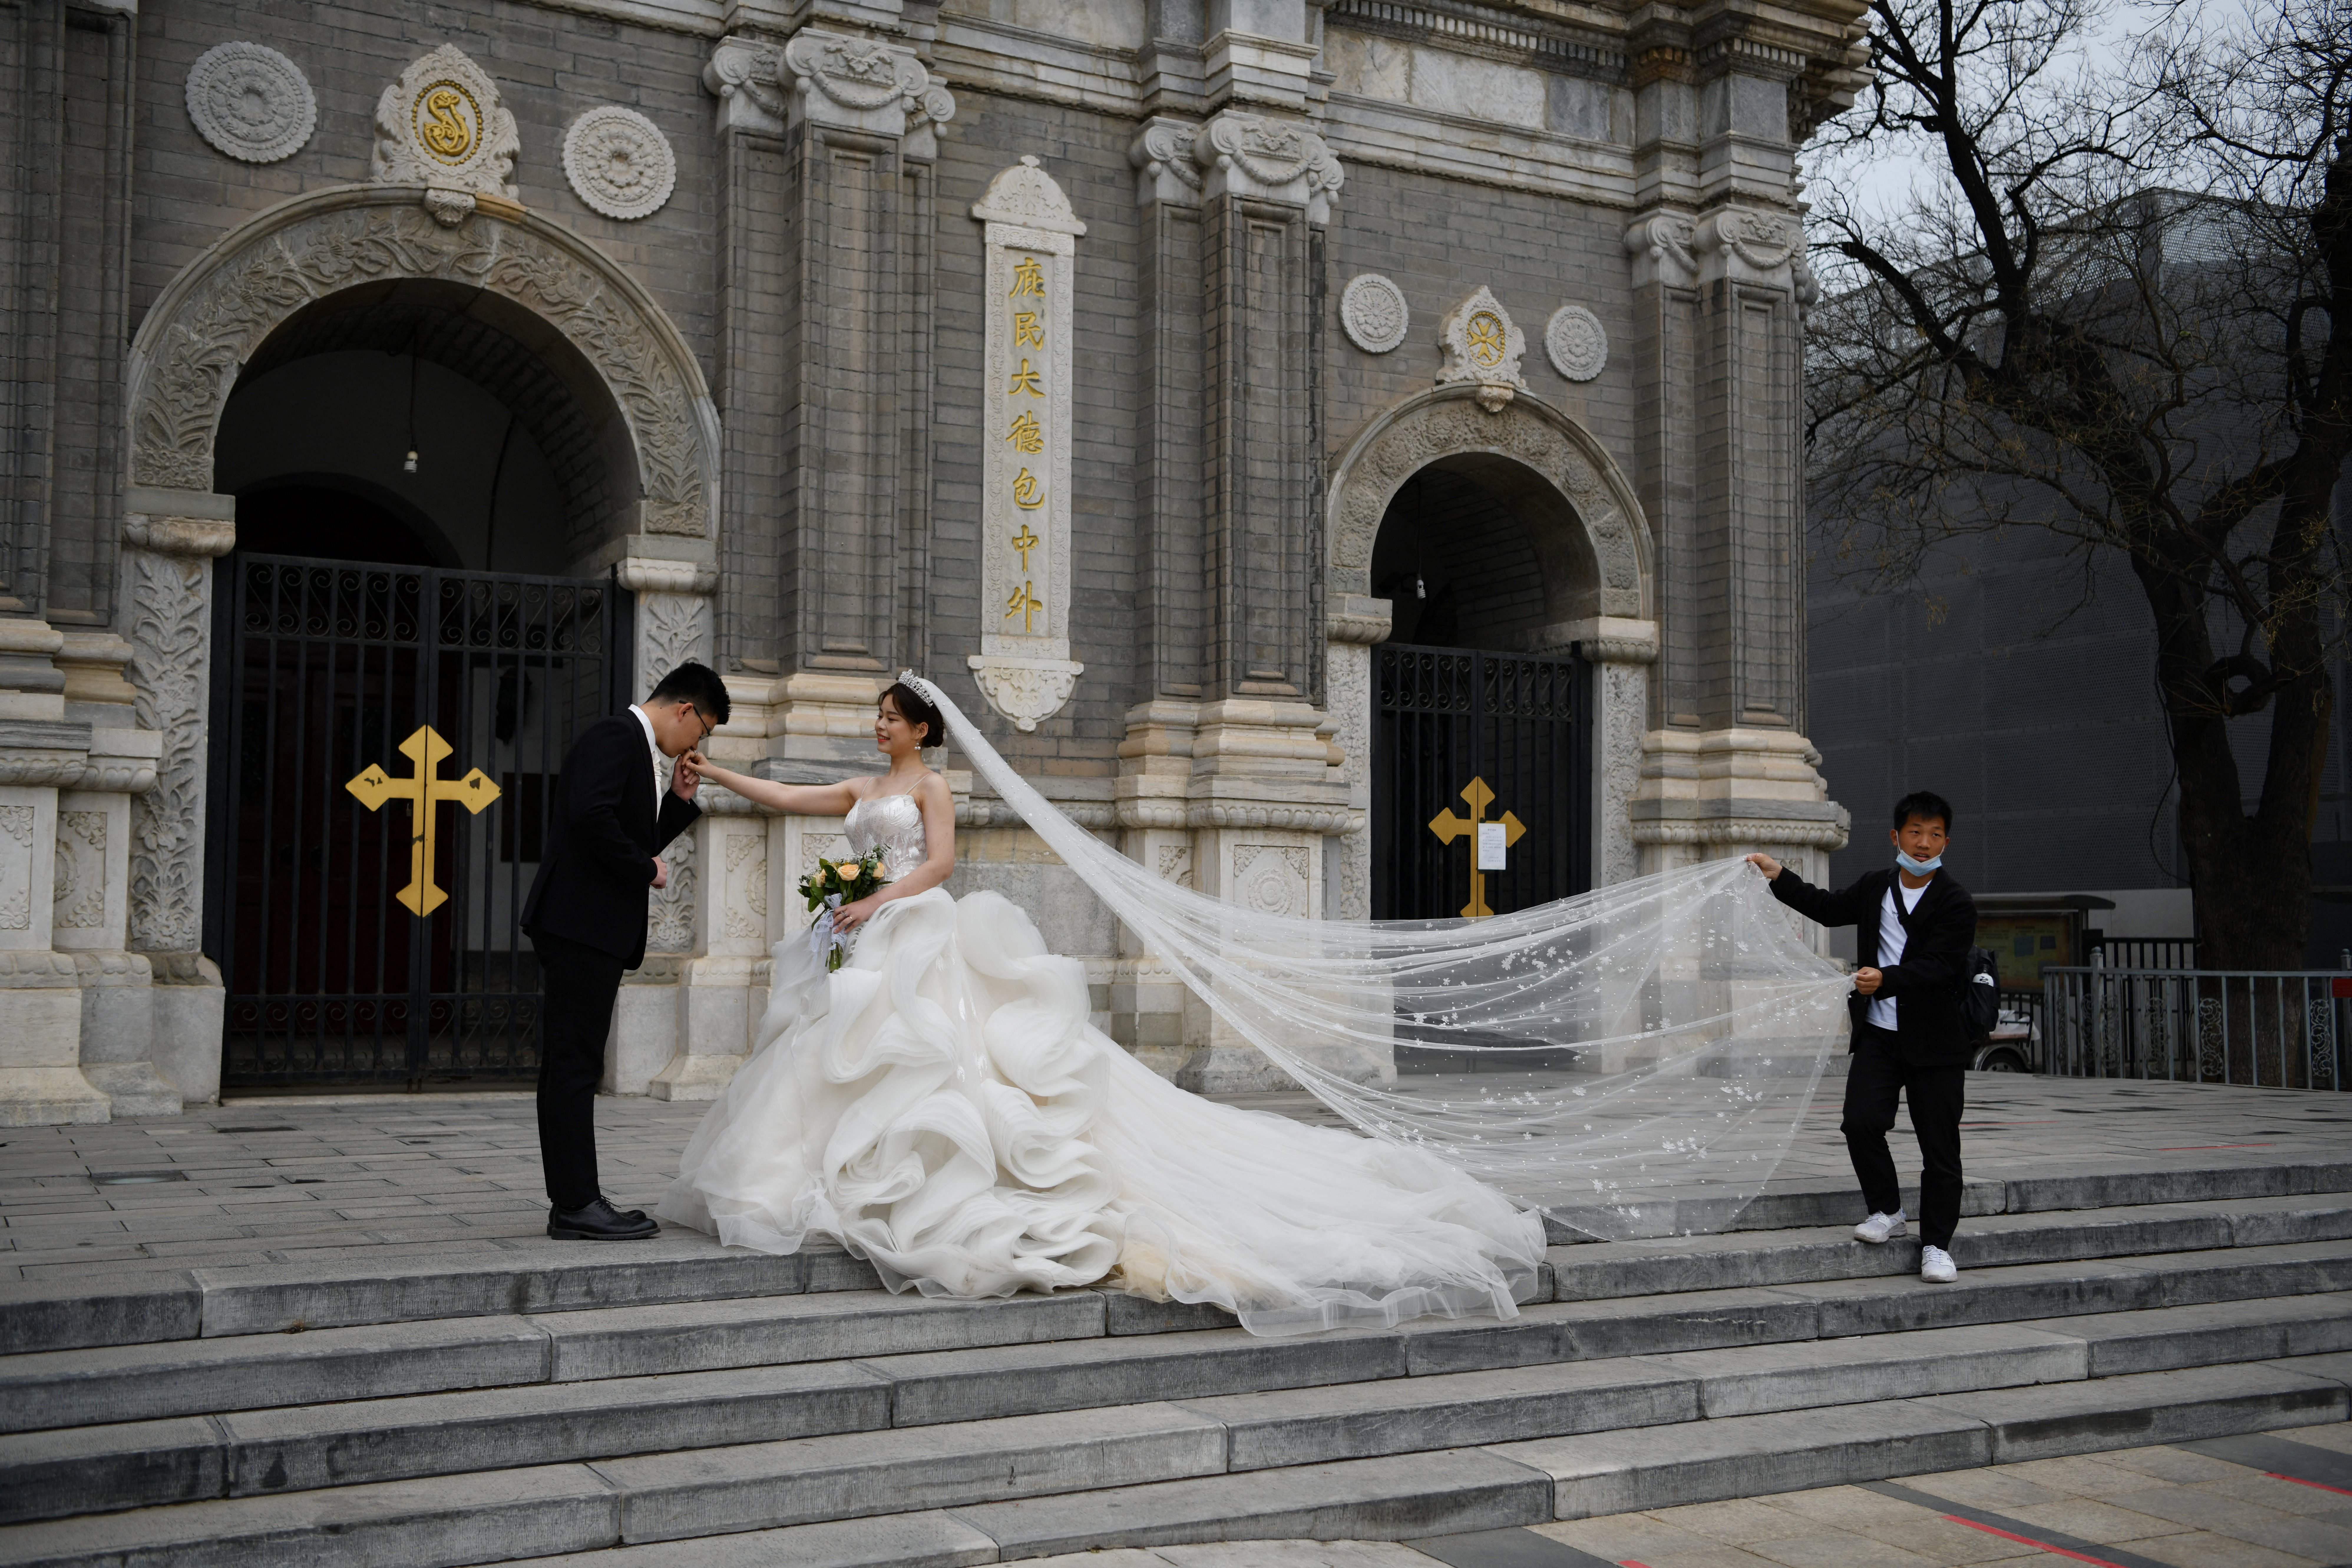 A couple poses for wedding photos outside St Joseph’s Church, also known as Wangfujing Catholic Church, in Beijing